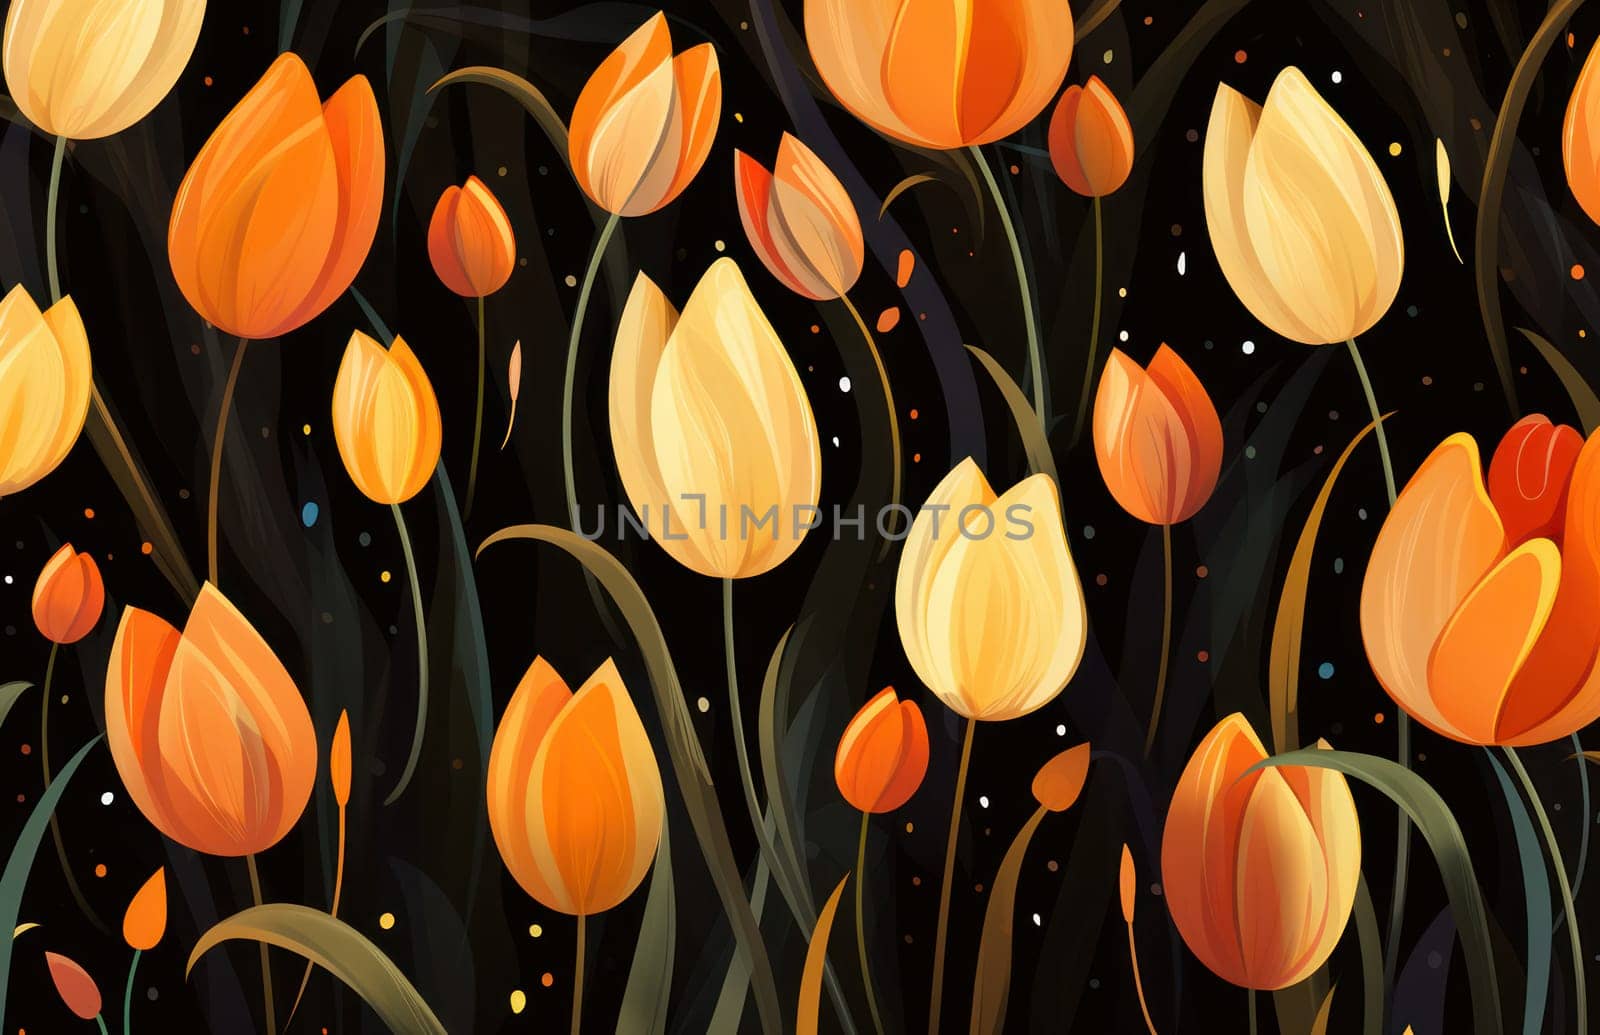 Colorful Floral Elegance: A Vibrant Tulip Bouquet on a Dark Retro Wallpaper with Ornate Floral Patterns by Vichizh